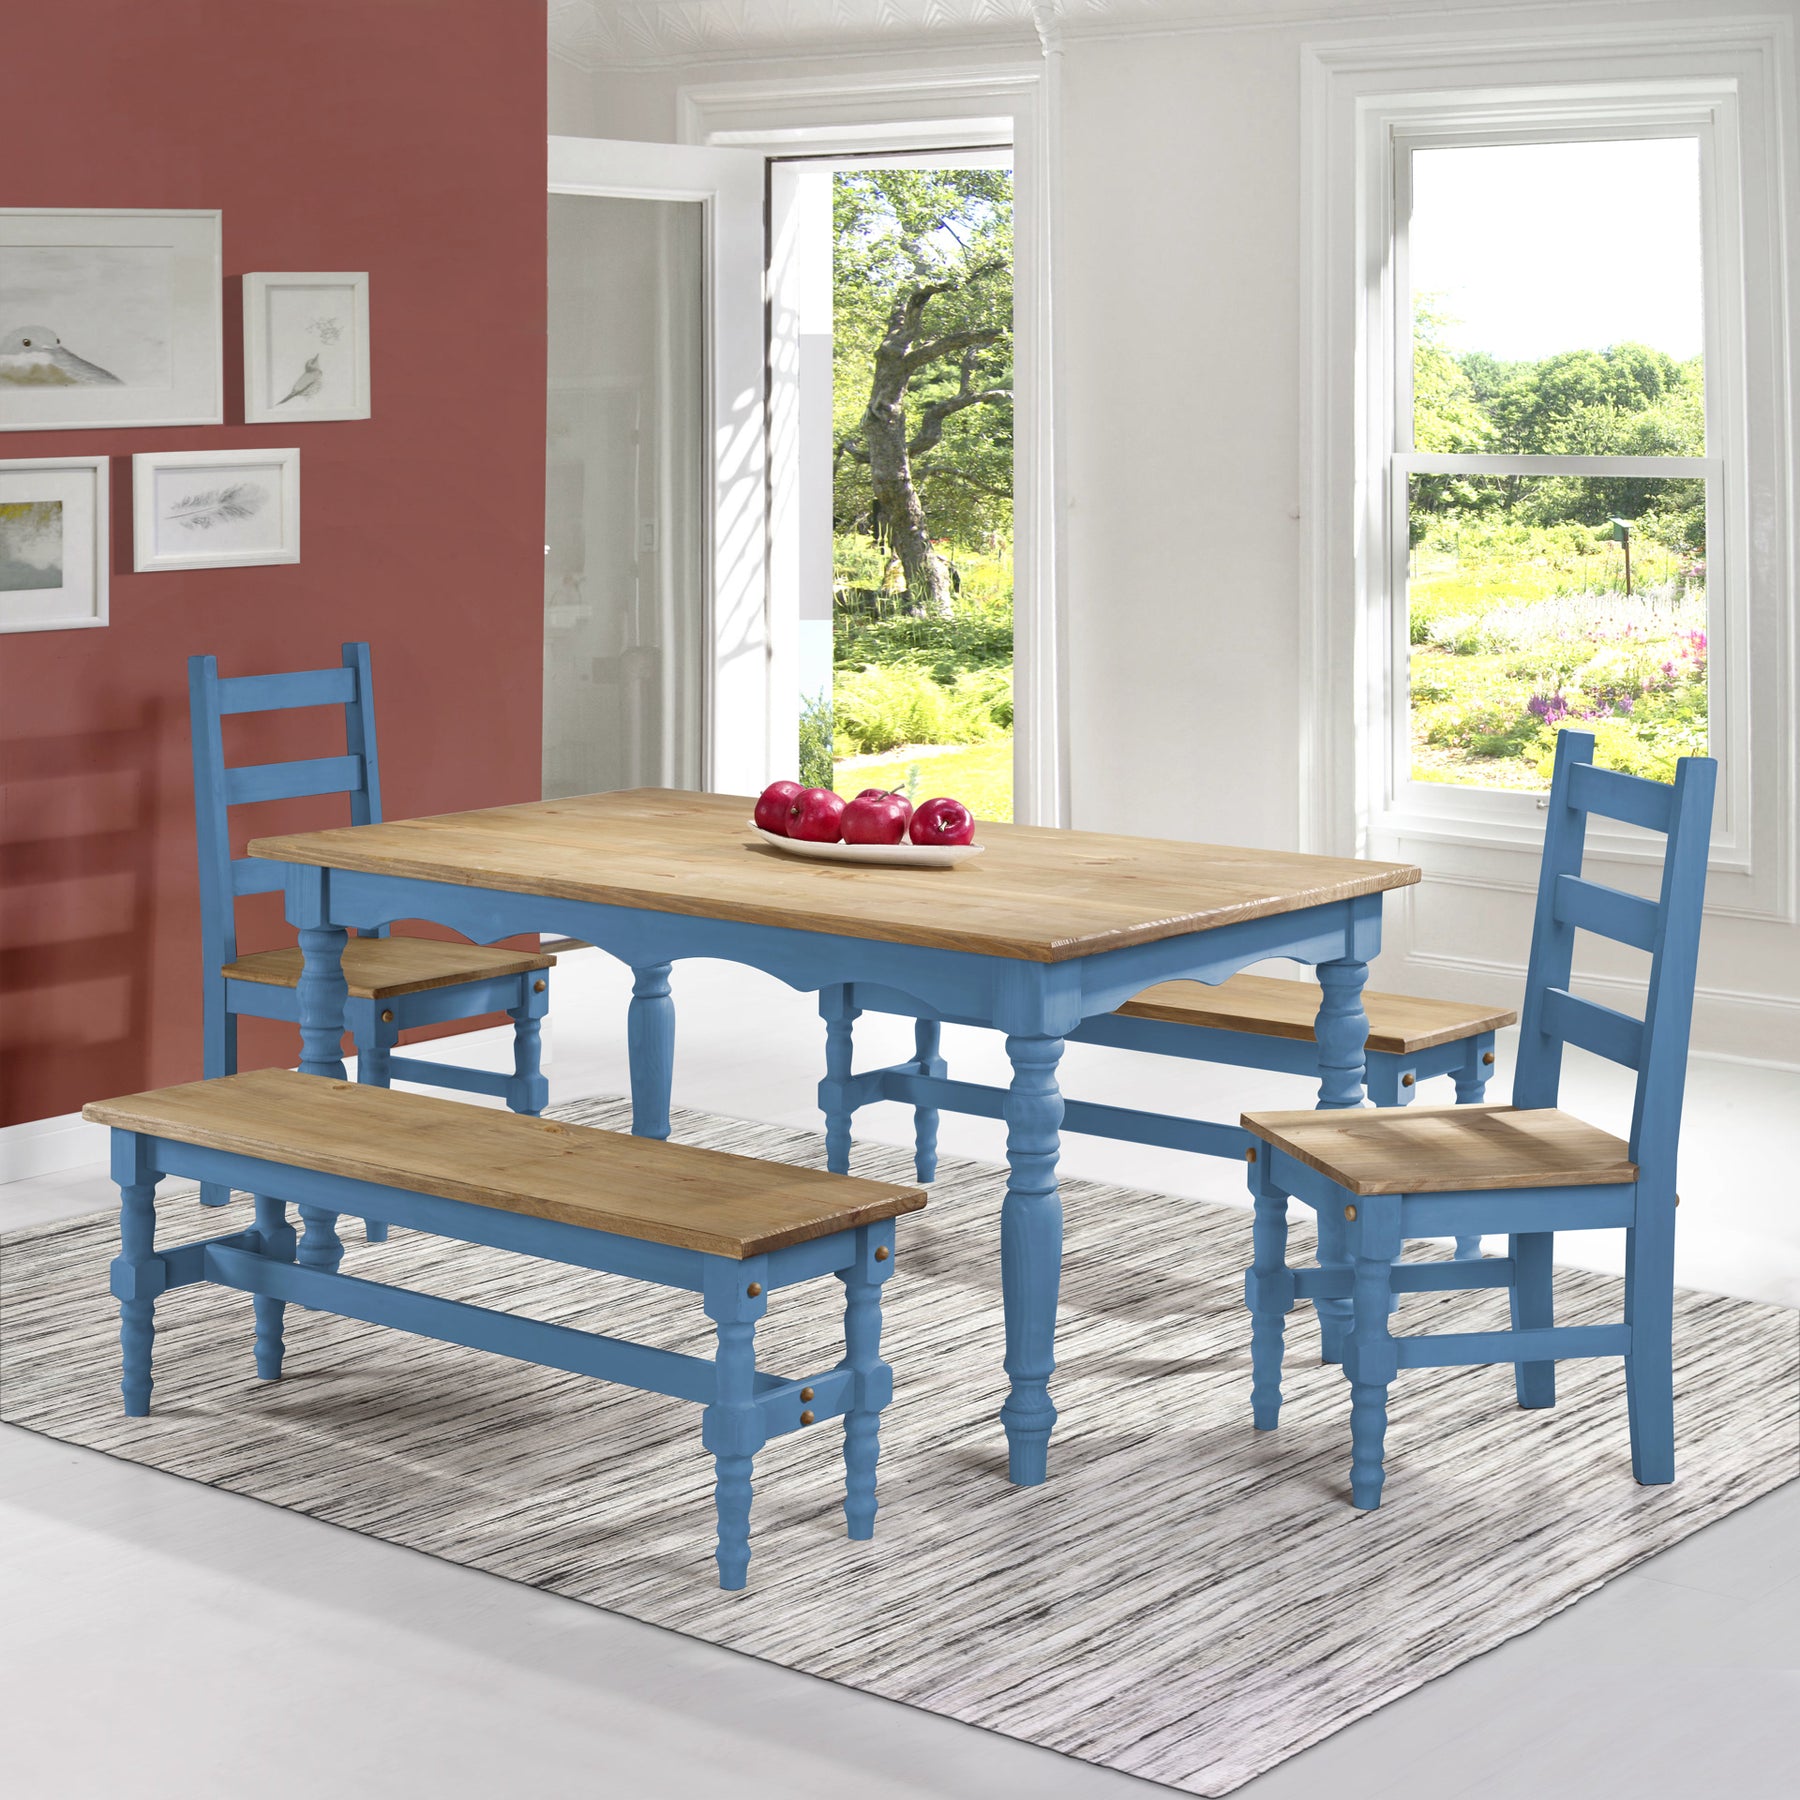 Manhattan Comfort Jay 5-Piece Solid Wood Dining Set with 2 Benches, 2 Chairs, and 1 Table in Blue Wash-Minimal & Modern